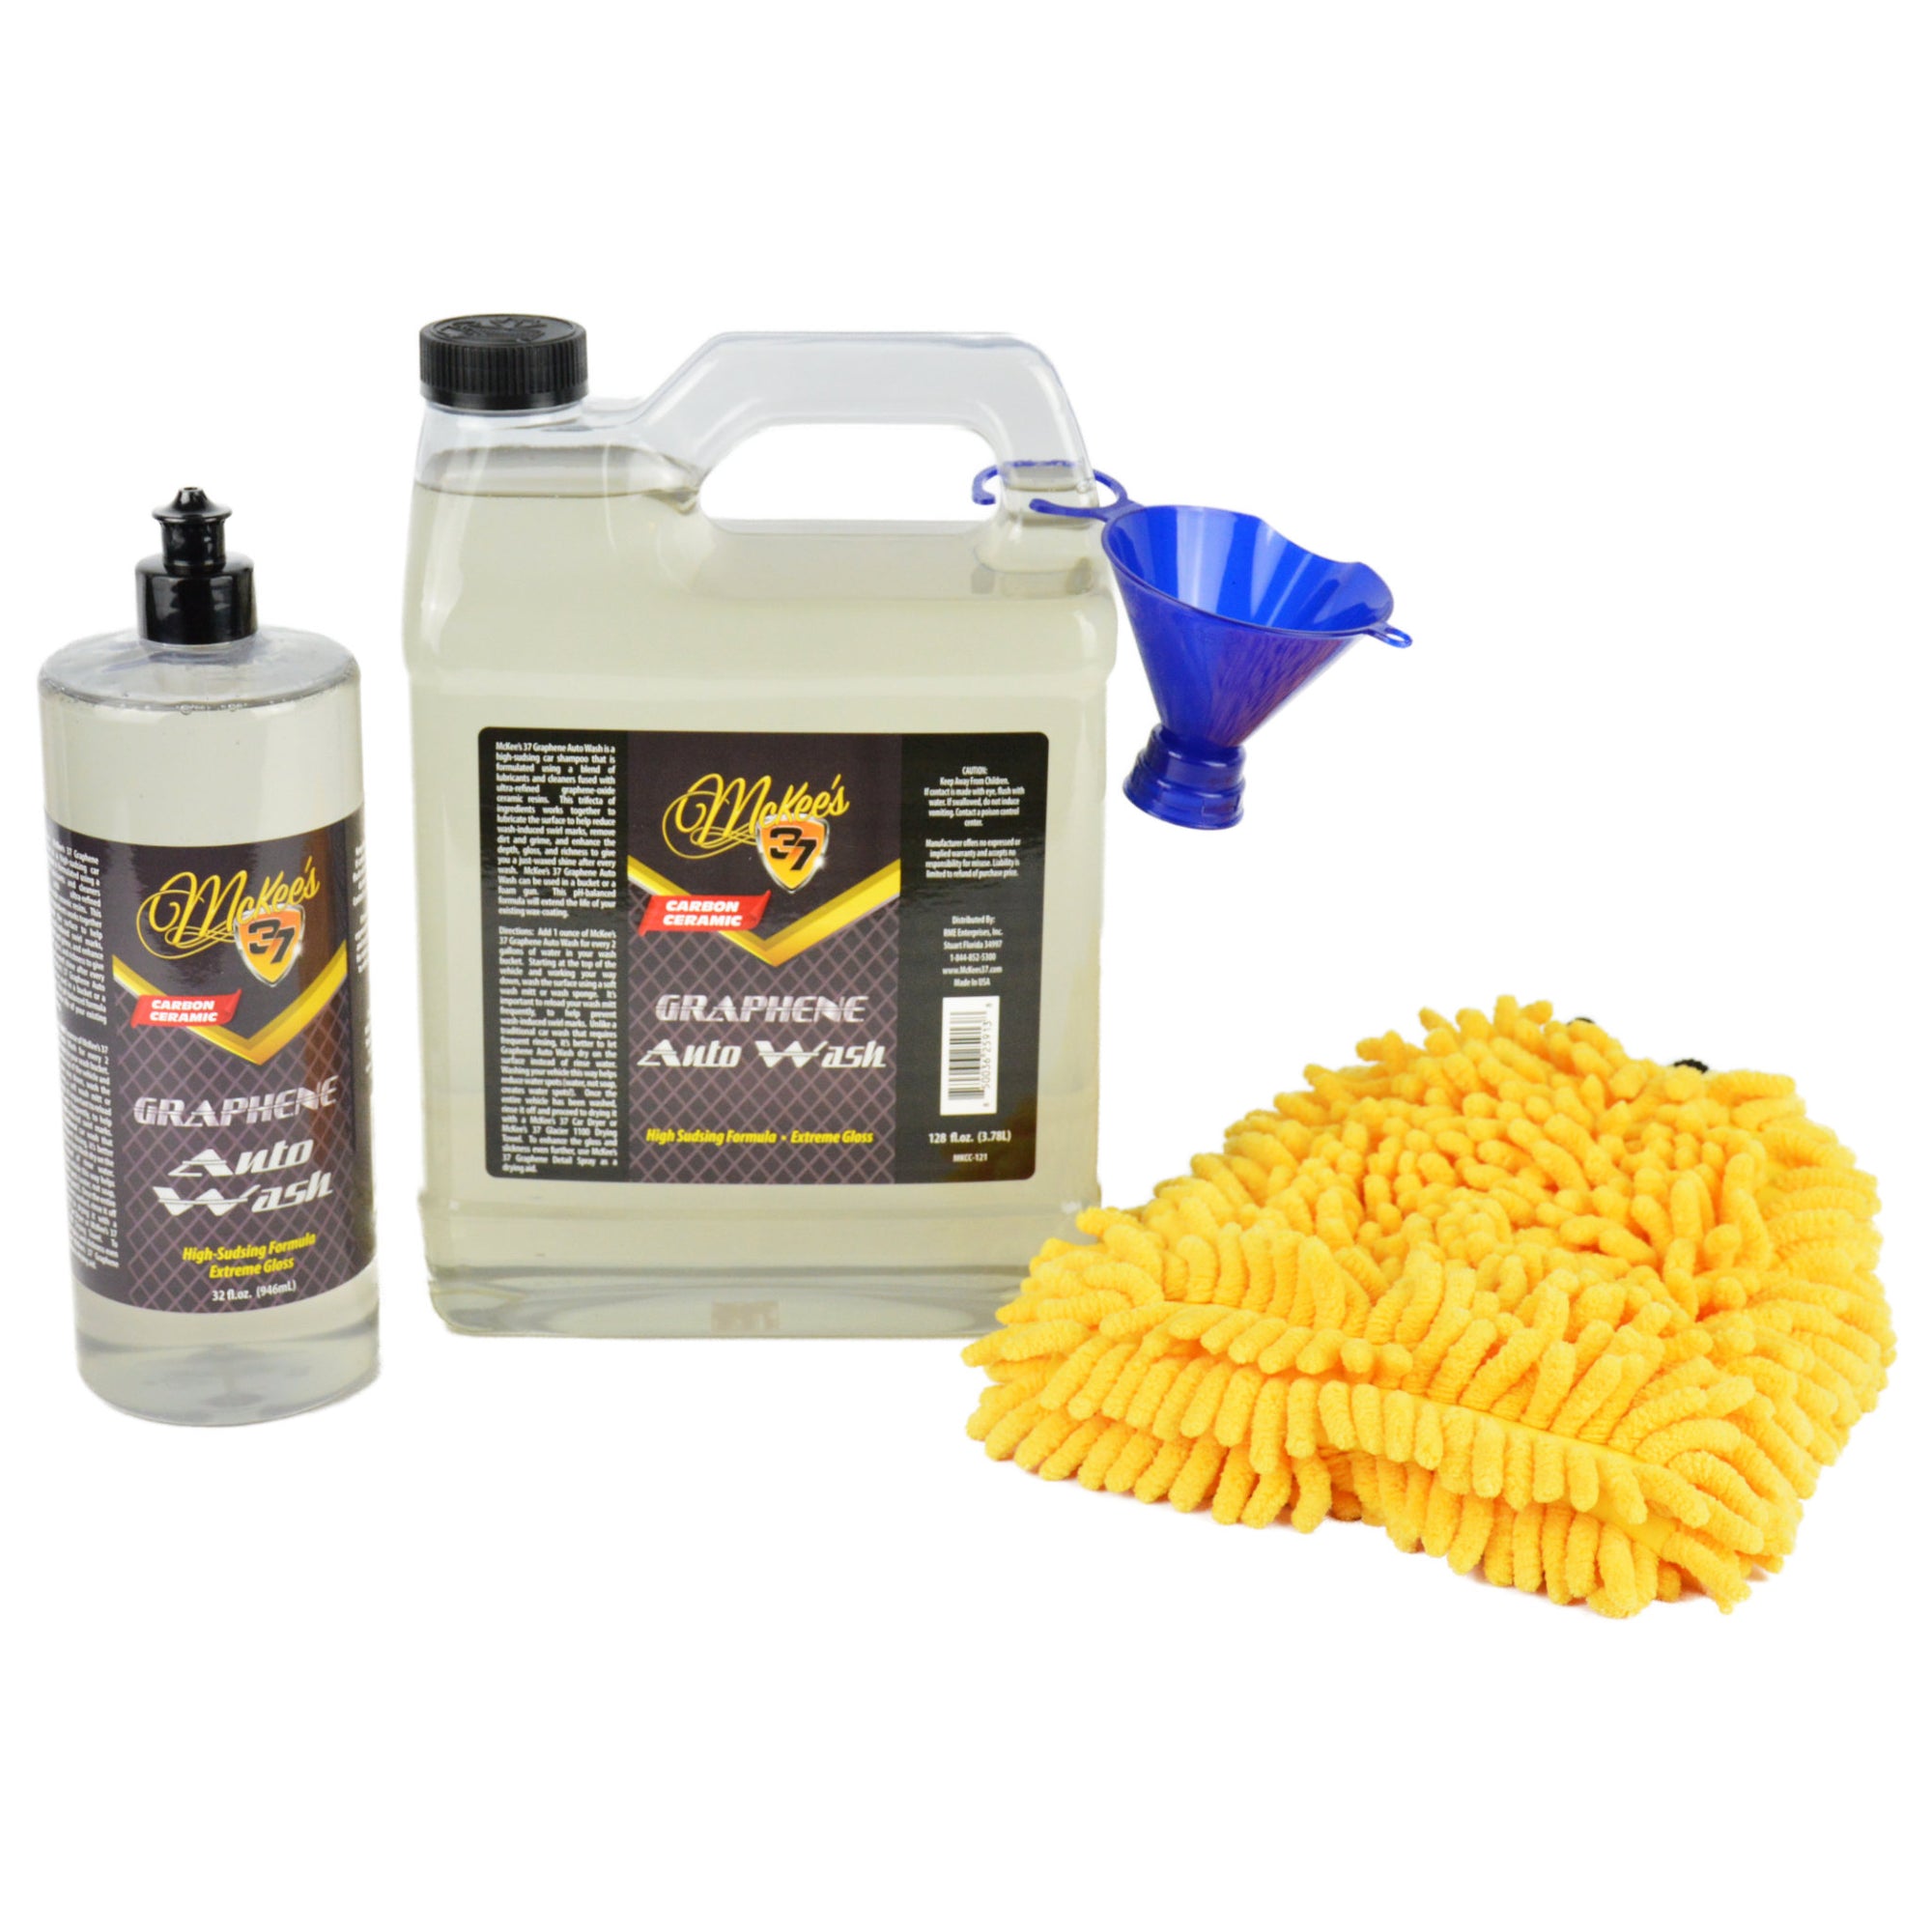 Touchless Vehicle Cleaners, Liquid, Touchless Foaming Vehicle Detergent -  3AAJ7